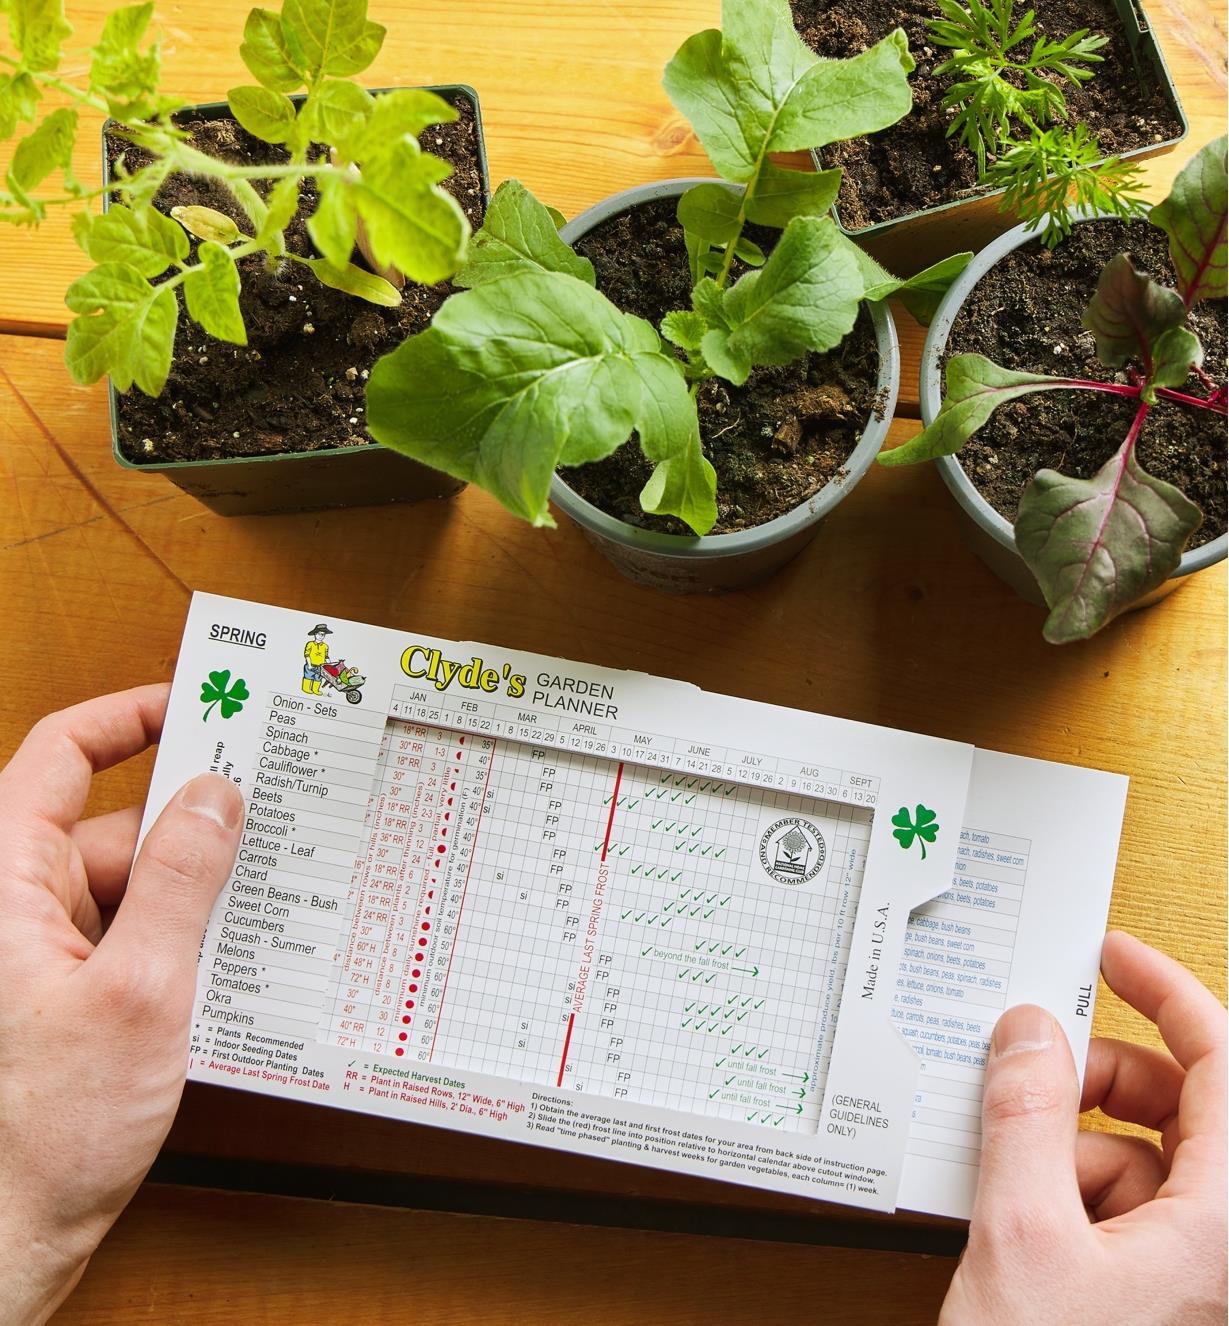 Pulling out the sliding chart of the vegetable garden planner, with several small potted plants in the background